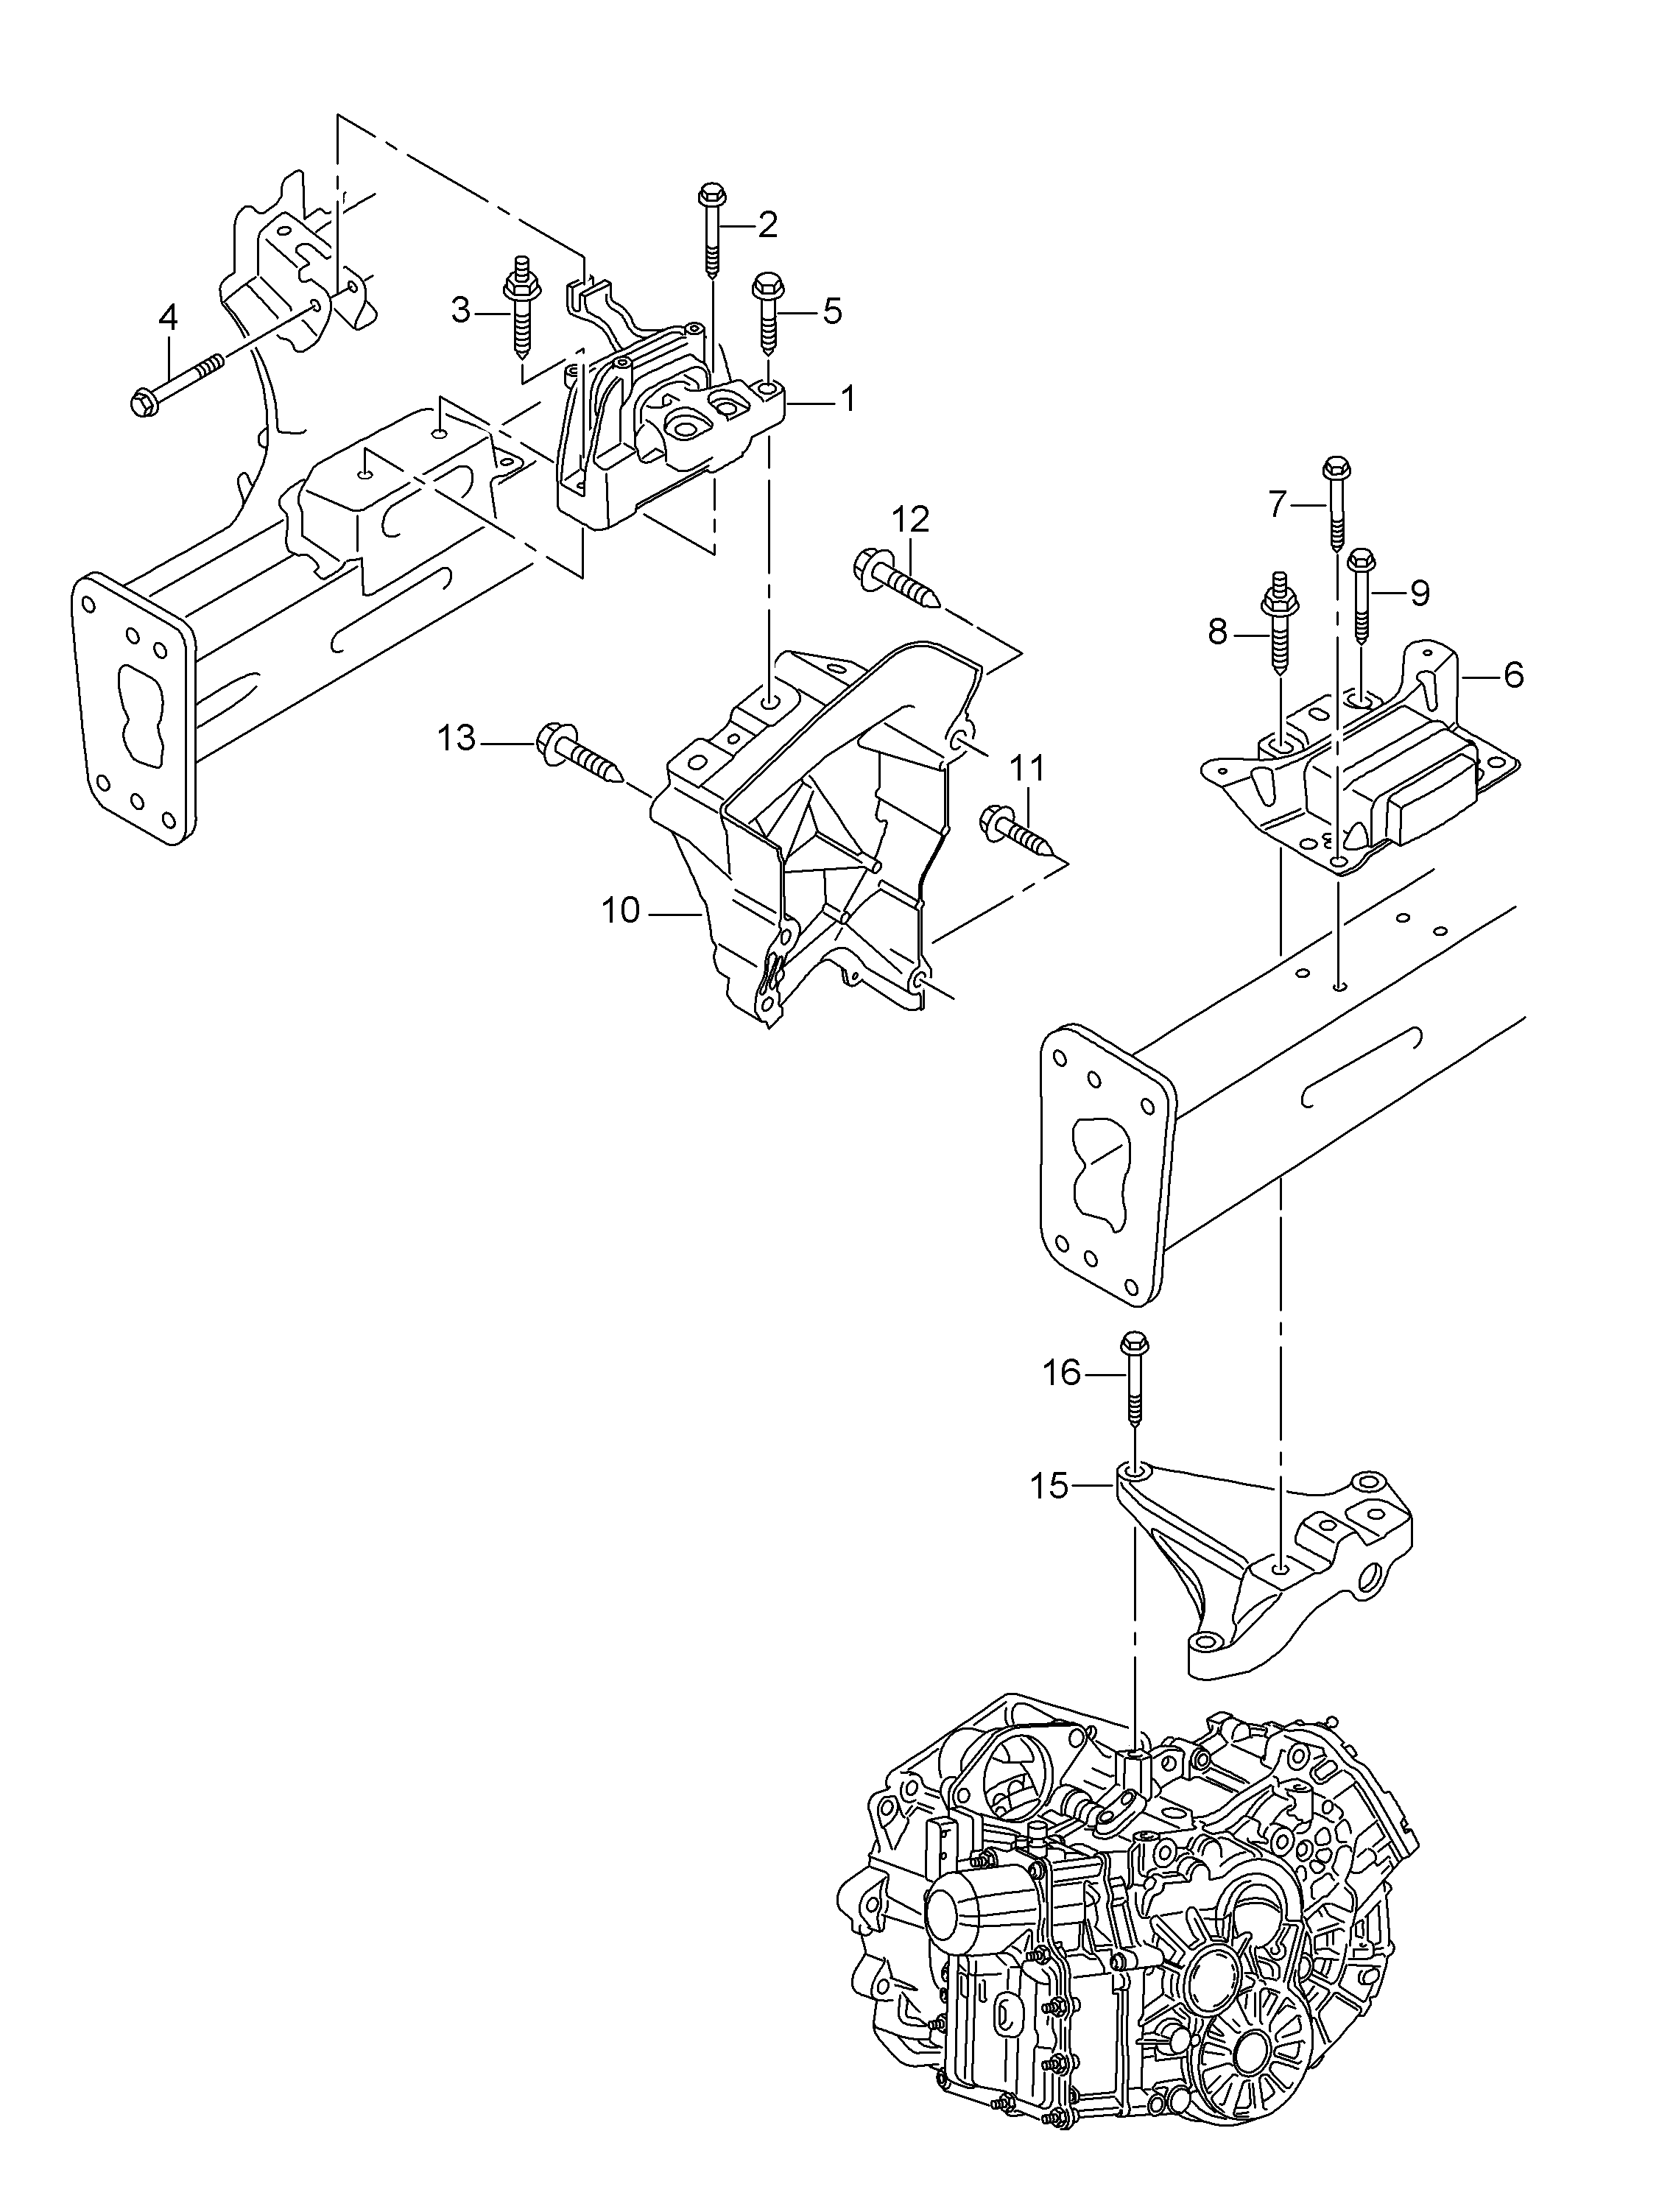 mounting parts for engine and
transmission - Leon/Leon 4(LE)  